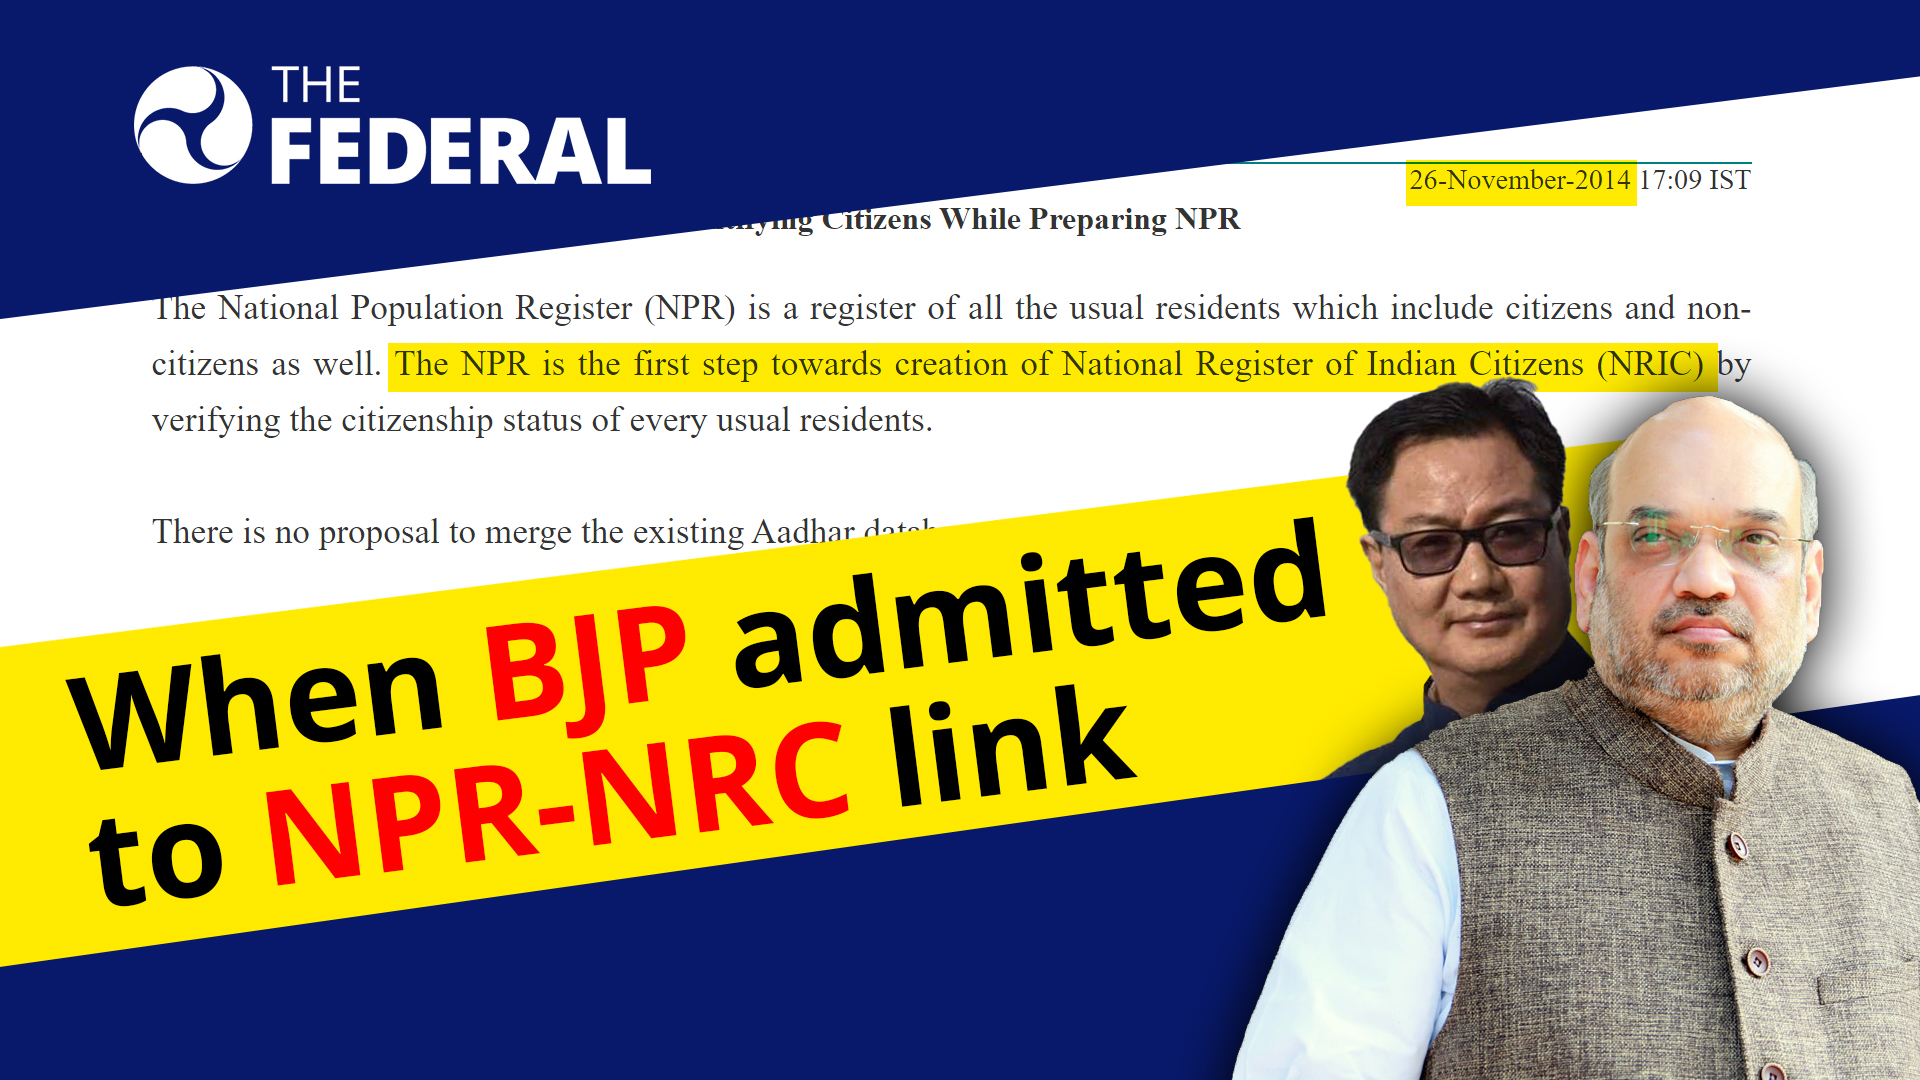 When BJP admitted to NPR-NRC link